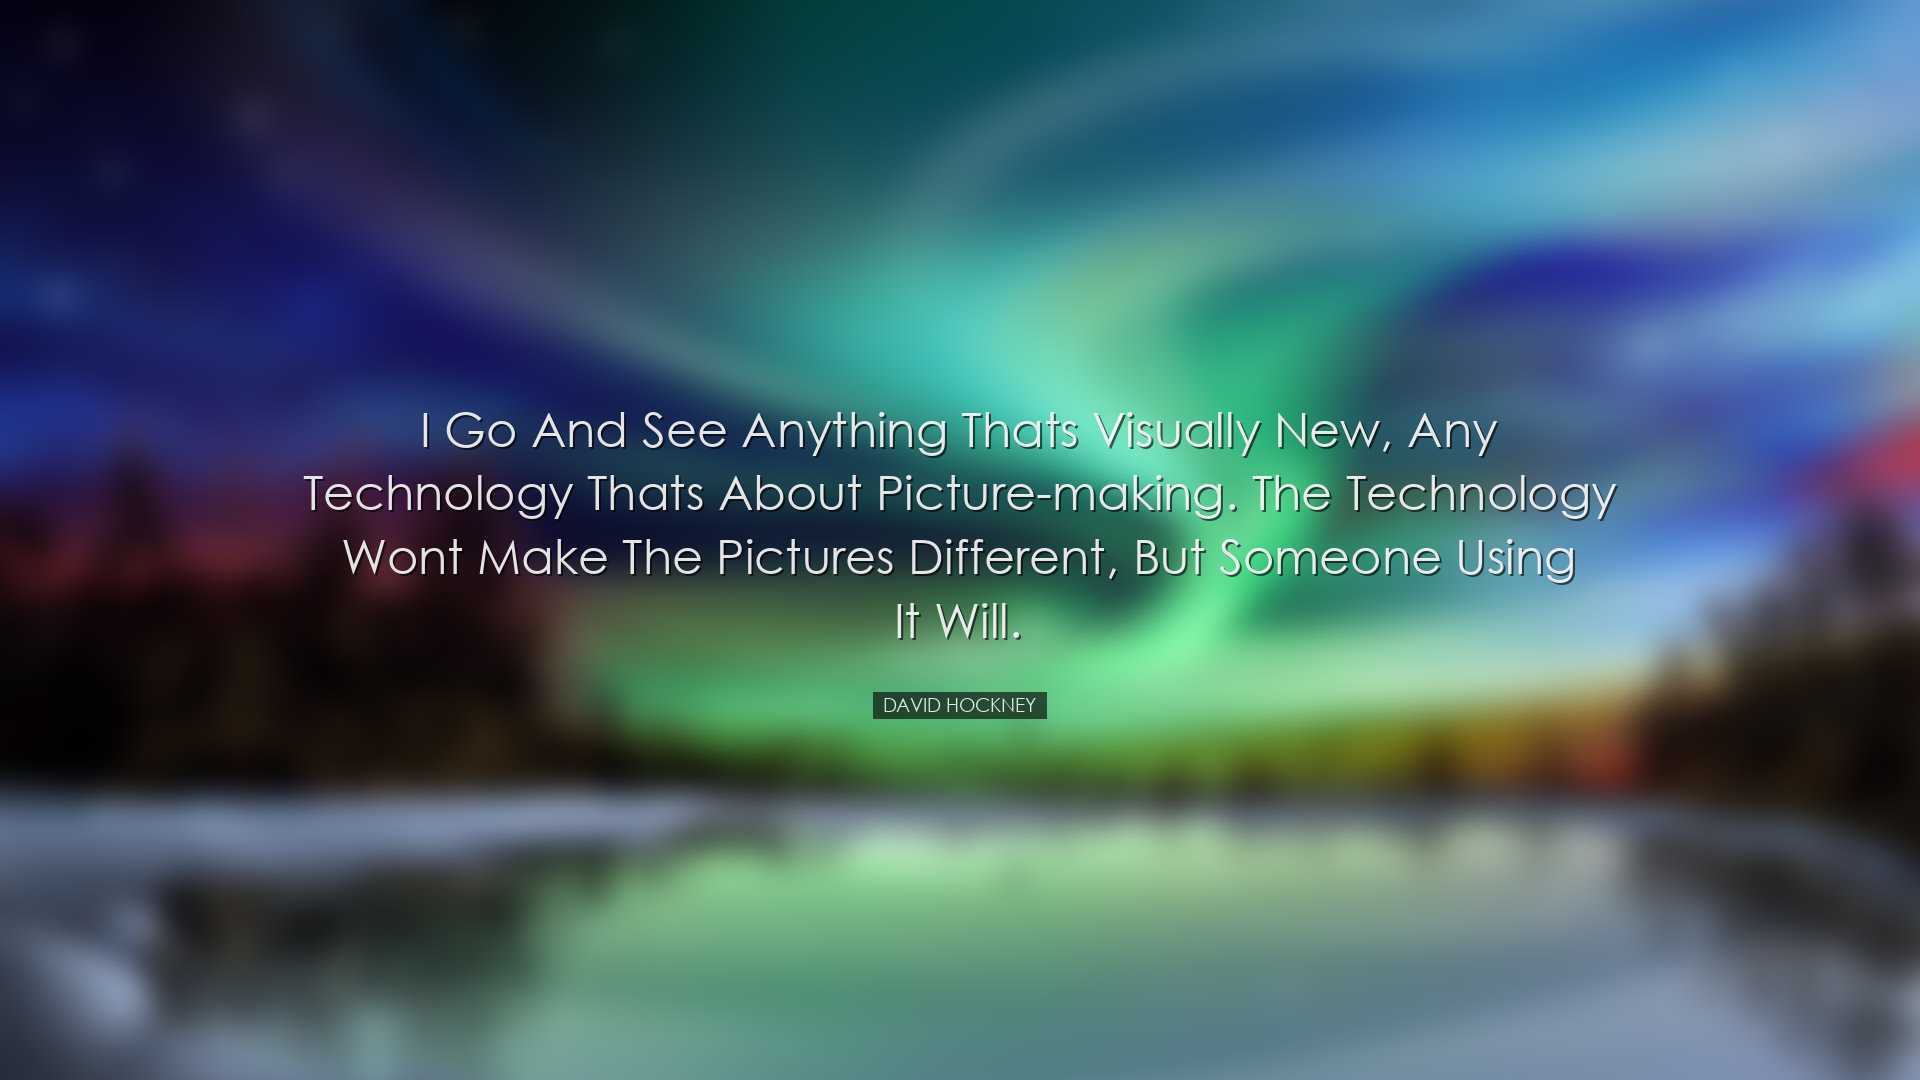 I go and see anything thats visually new, any technology thats abo